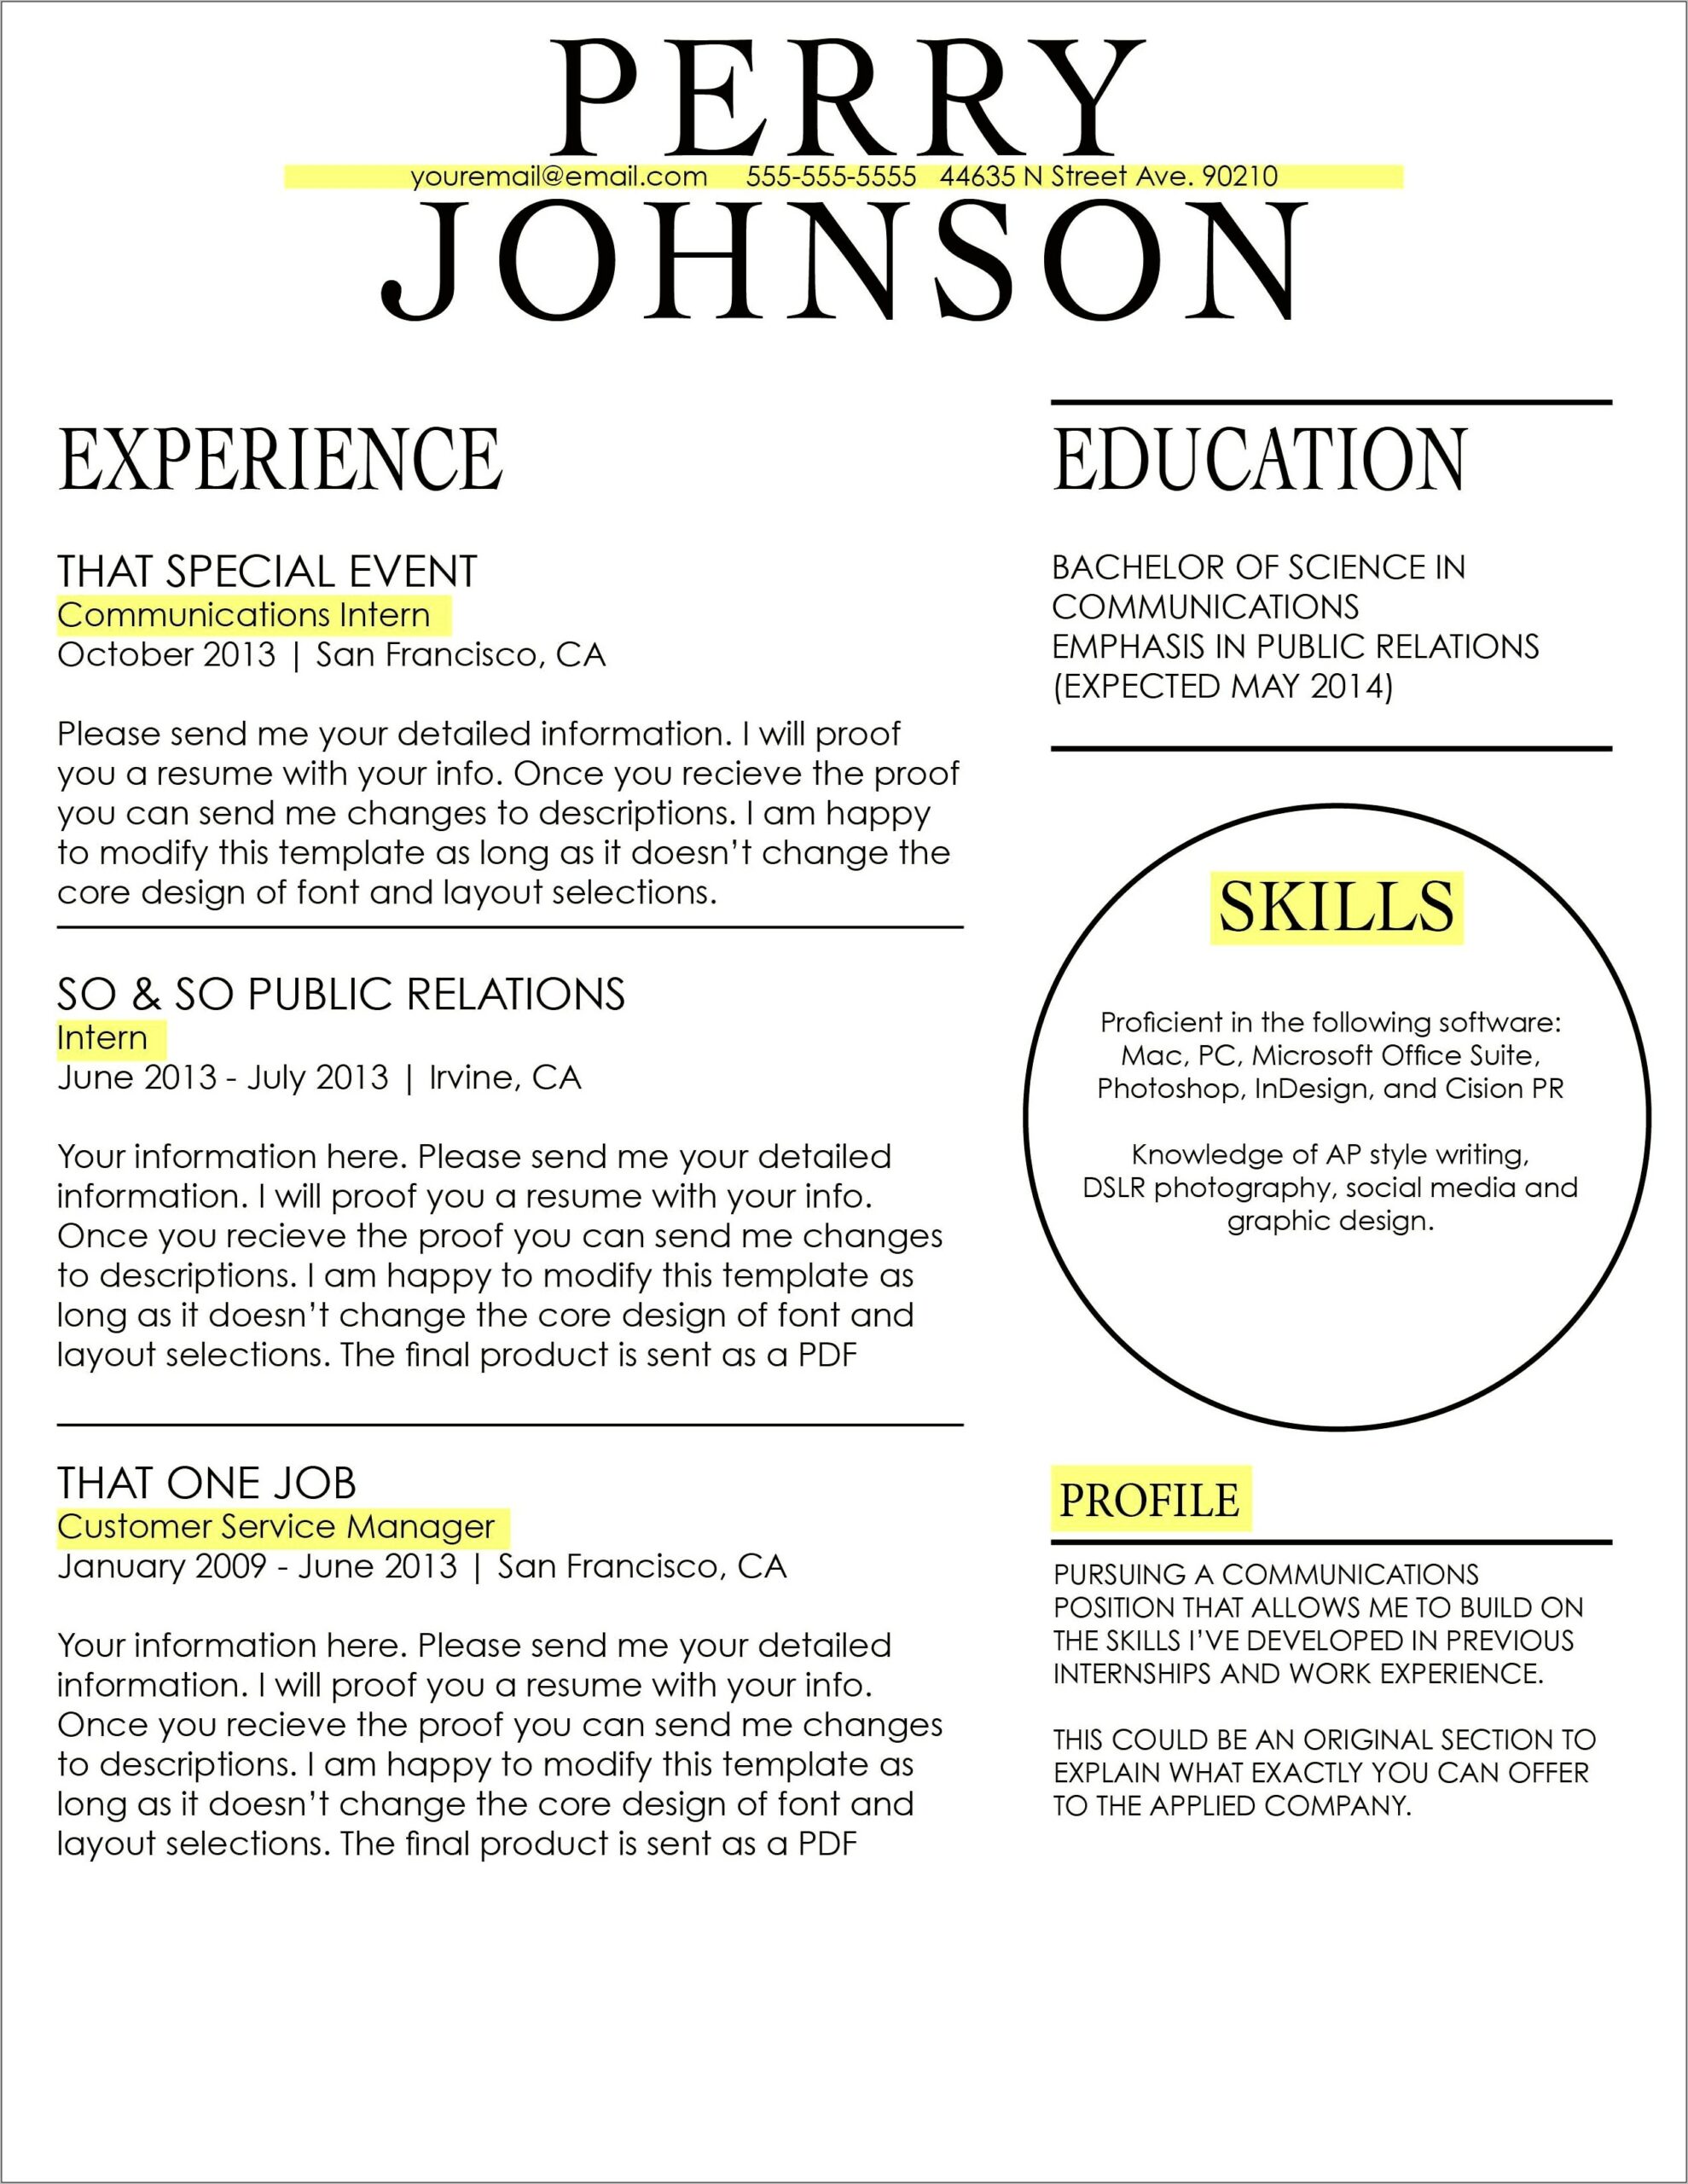 Resume Working For Selling On An Etsy Shop